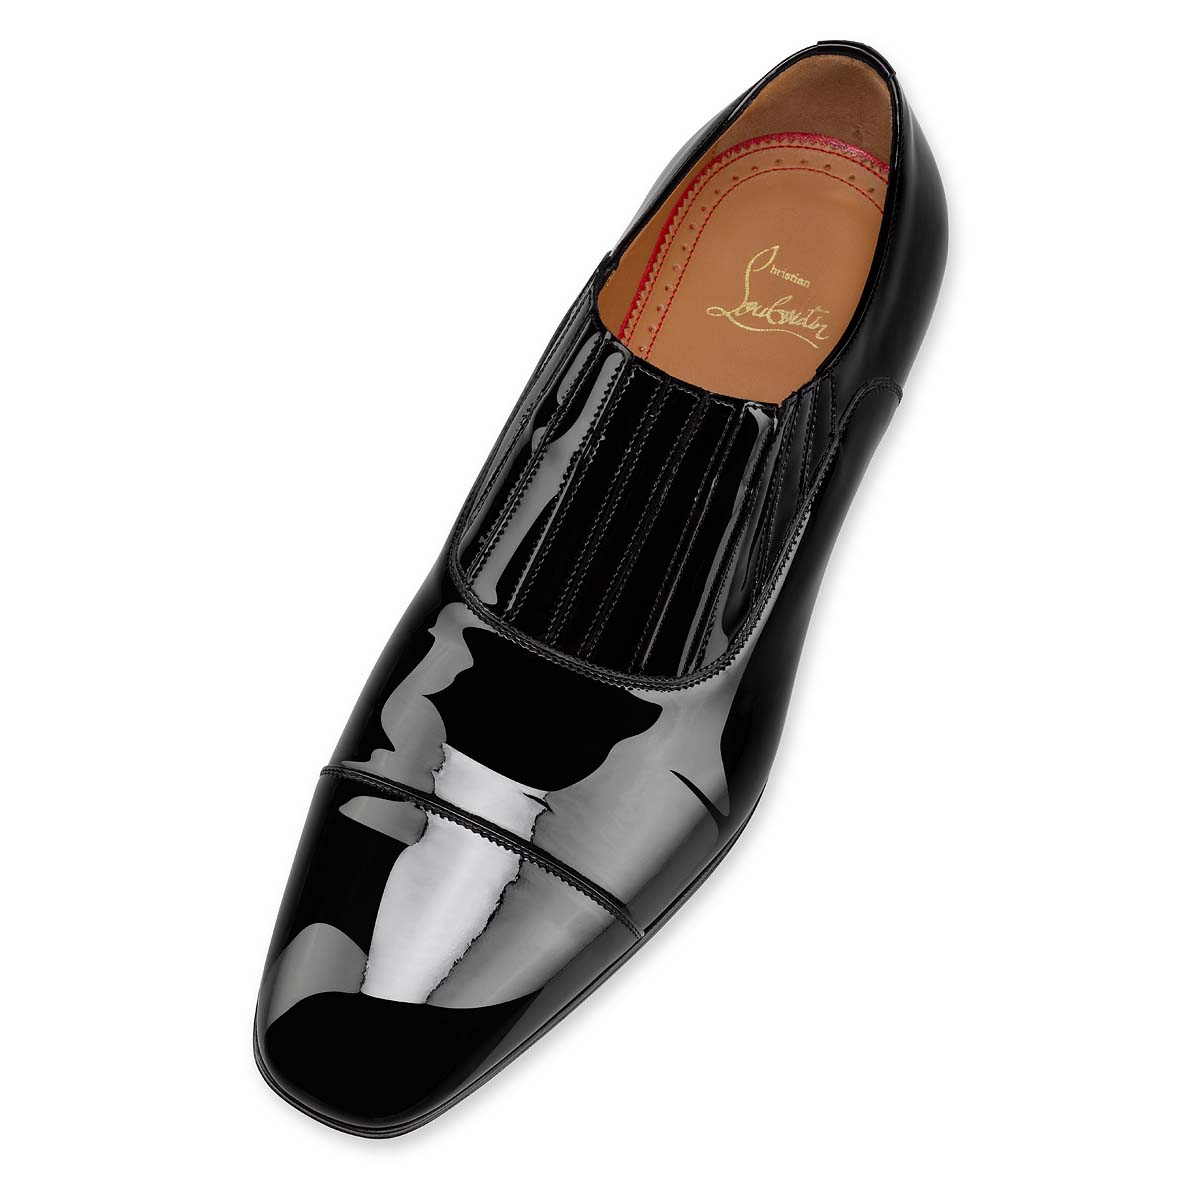 The essentials for men - Christian Louboutin